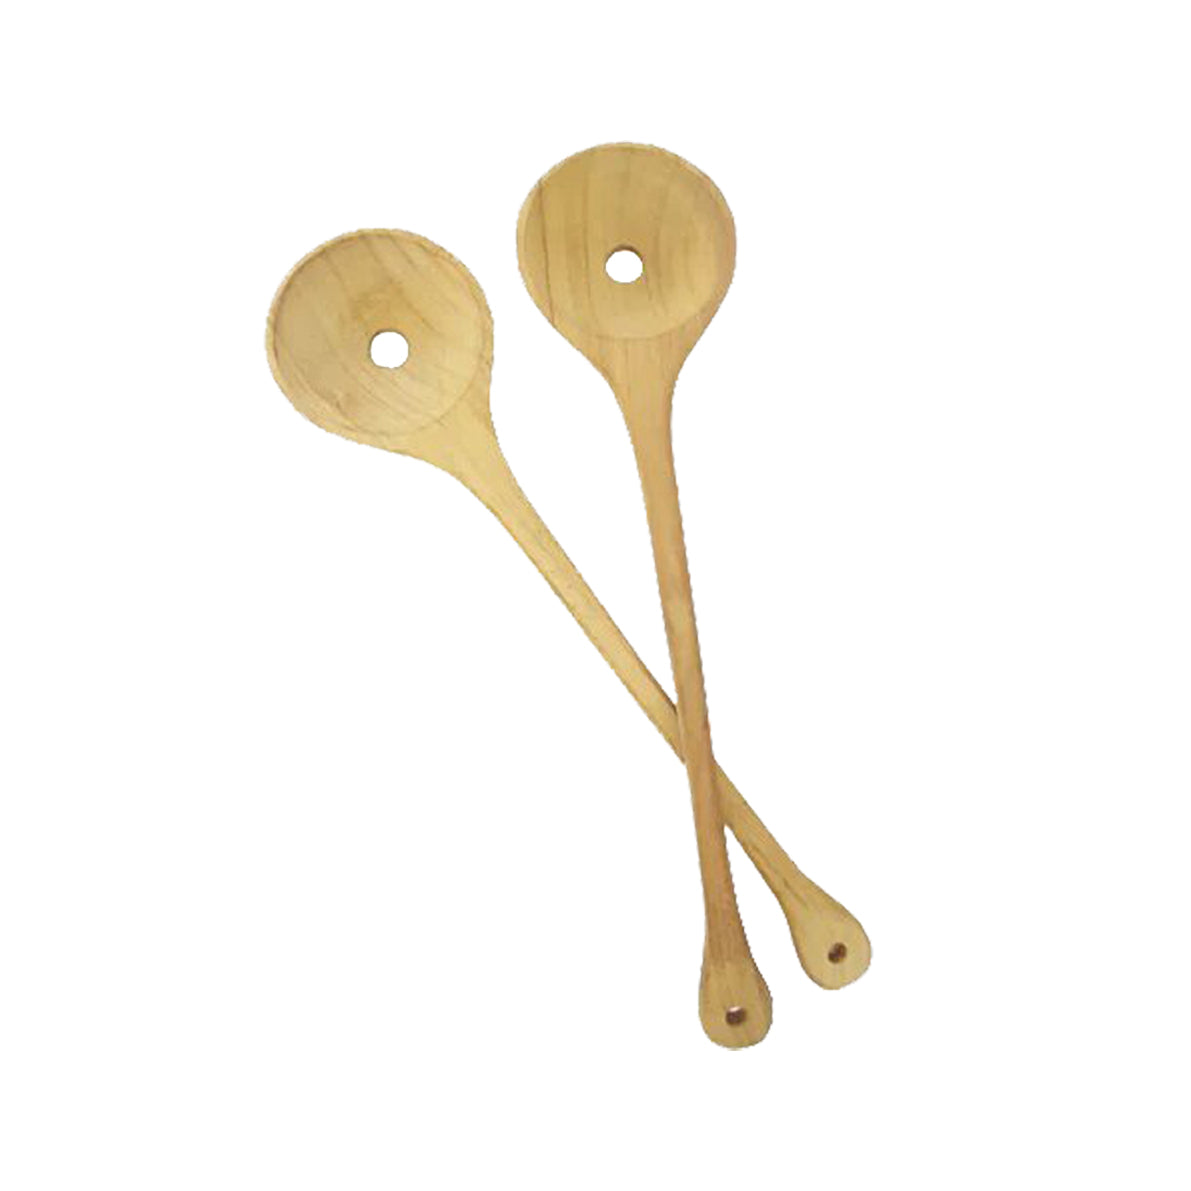 Wooden Spoons  - Set of 2